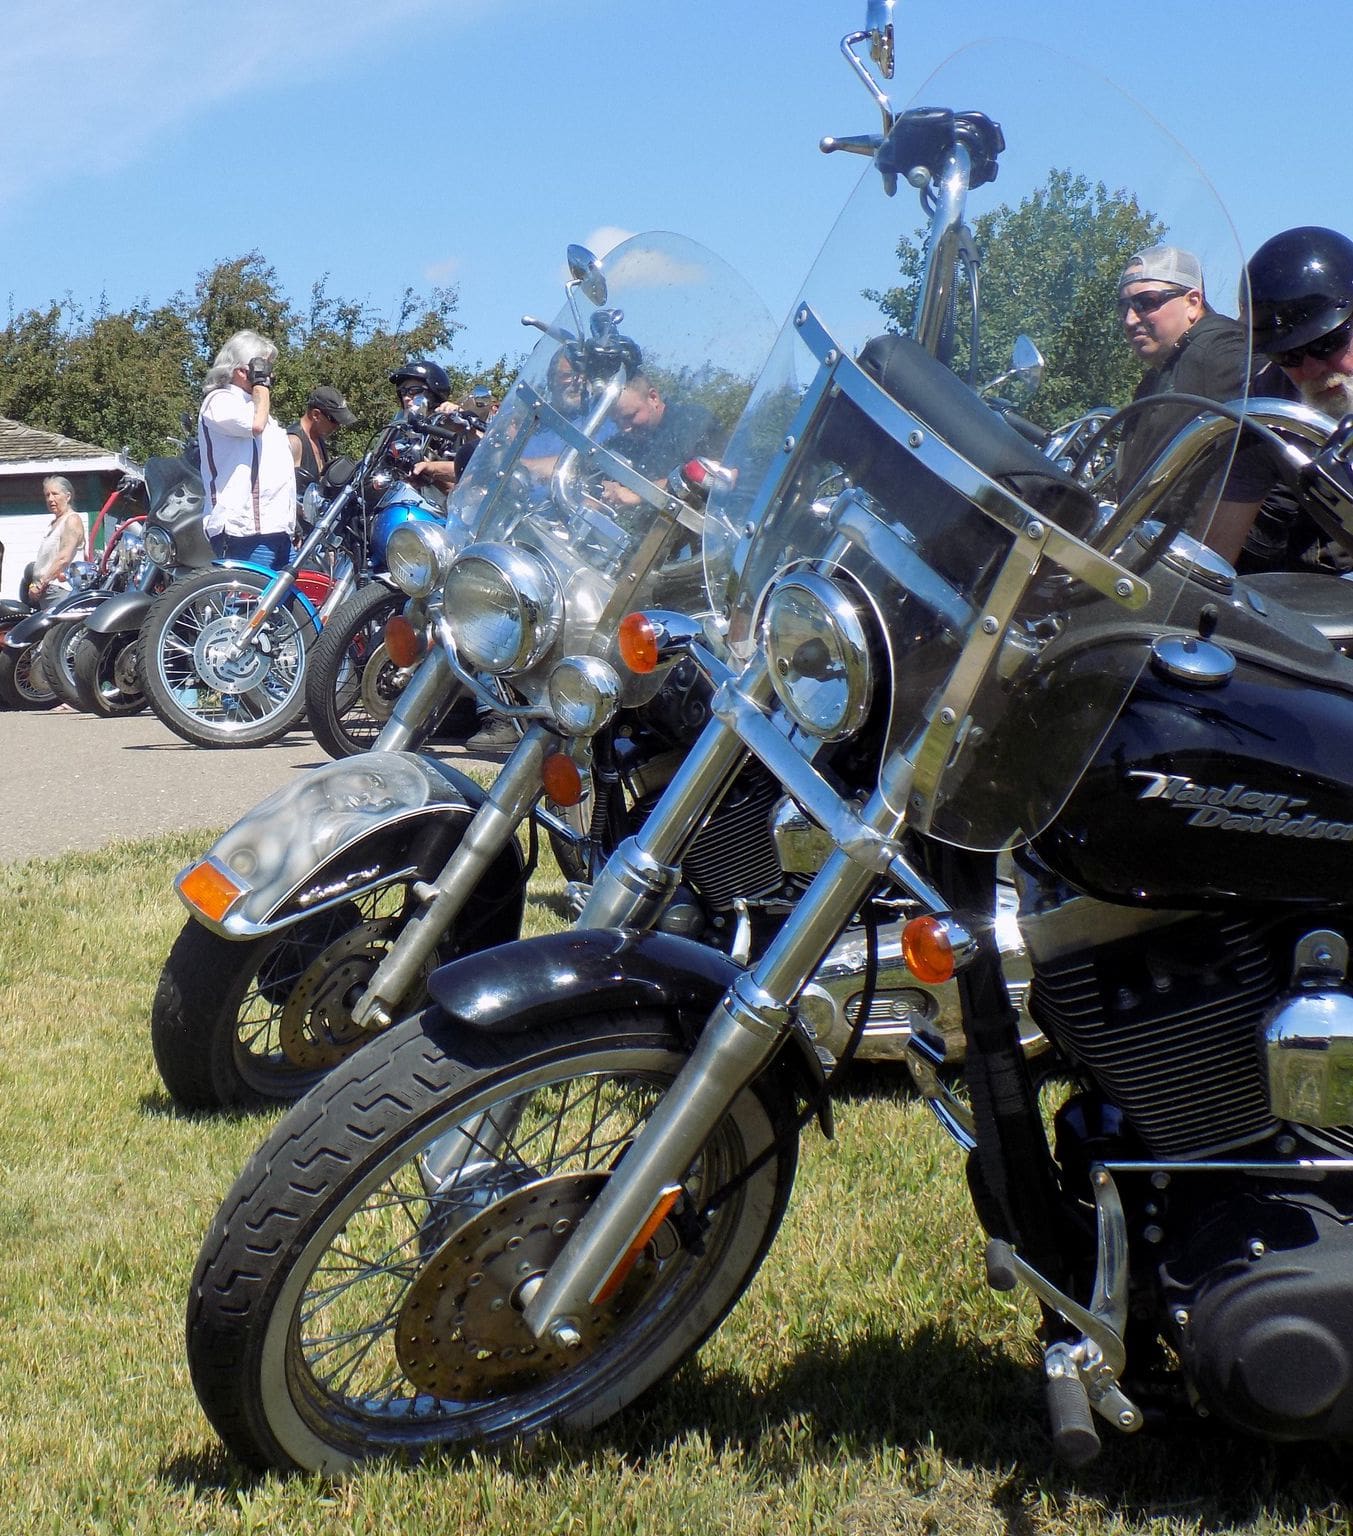 Featured Image for “Your Ultimate Guide for Run To The Hills Two Hills Bike Week”